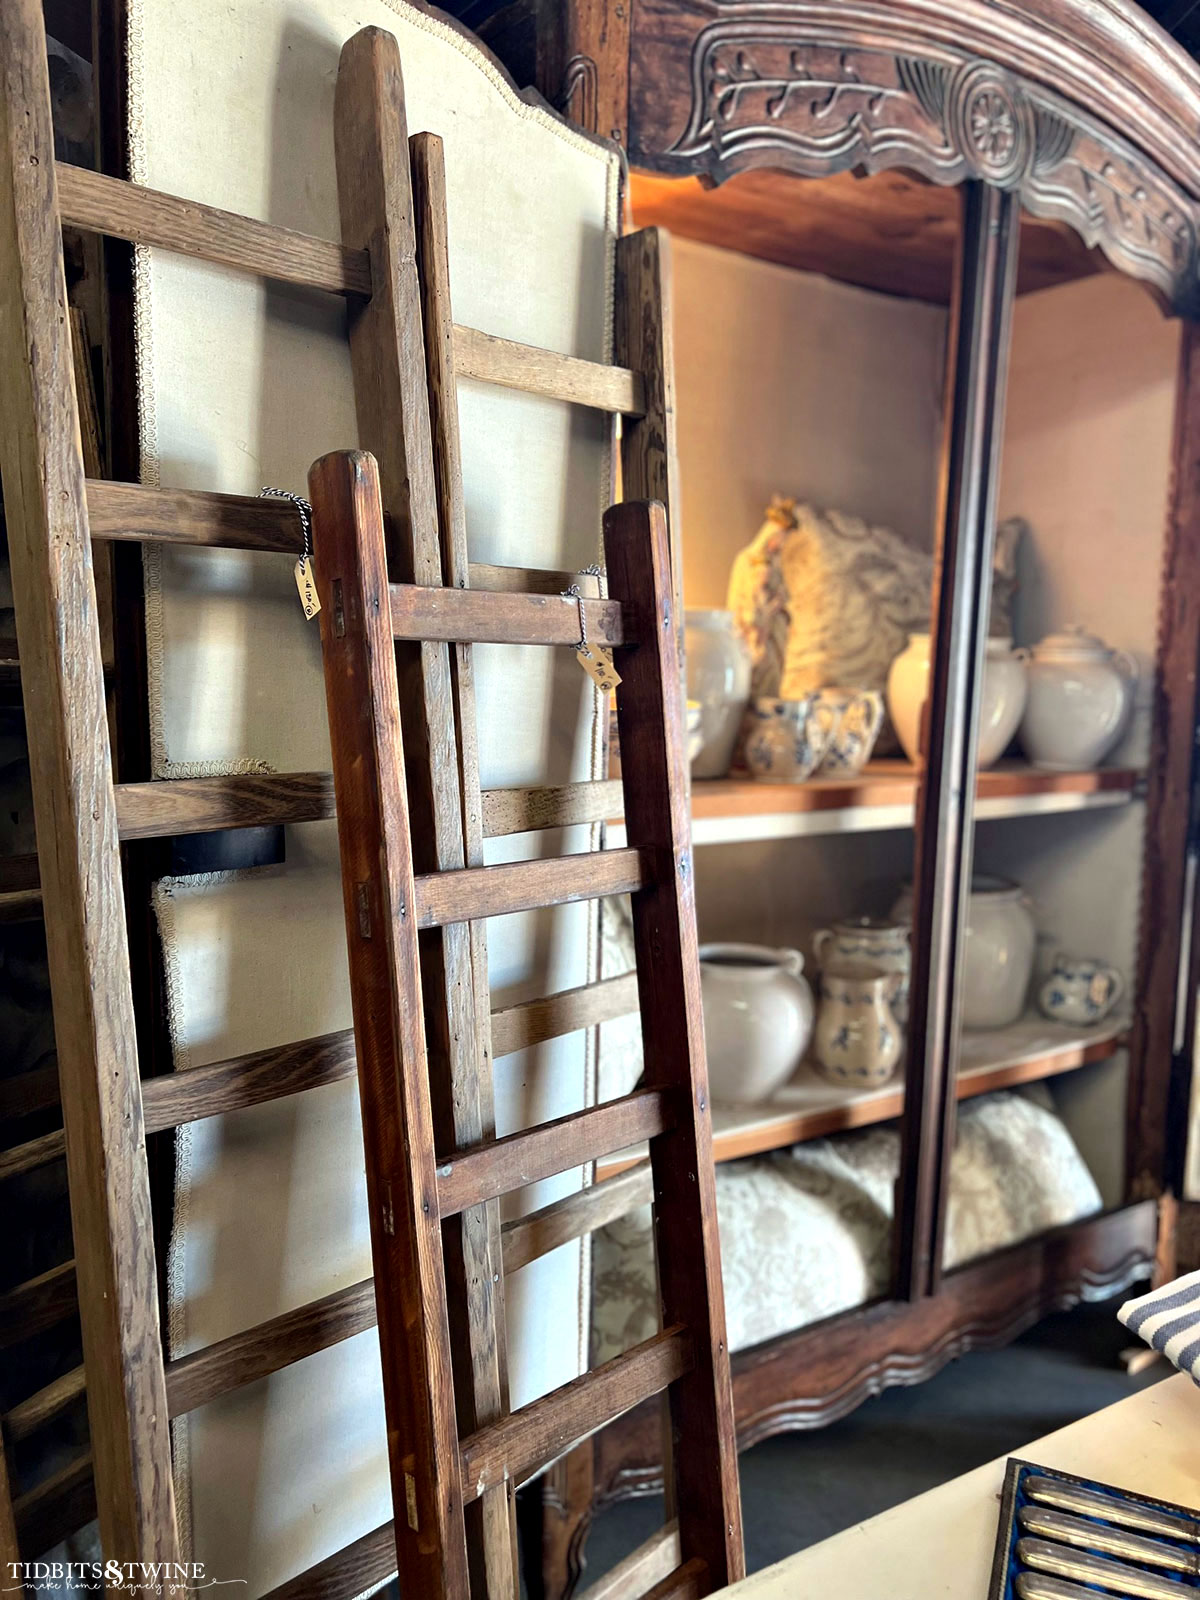 Antique French armoire lined with linen and full of antiques with old ladders leaning against the doors